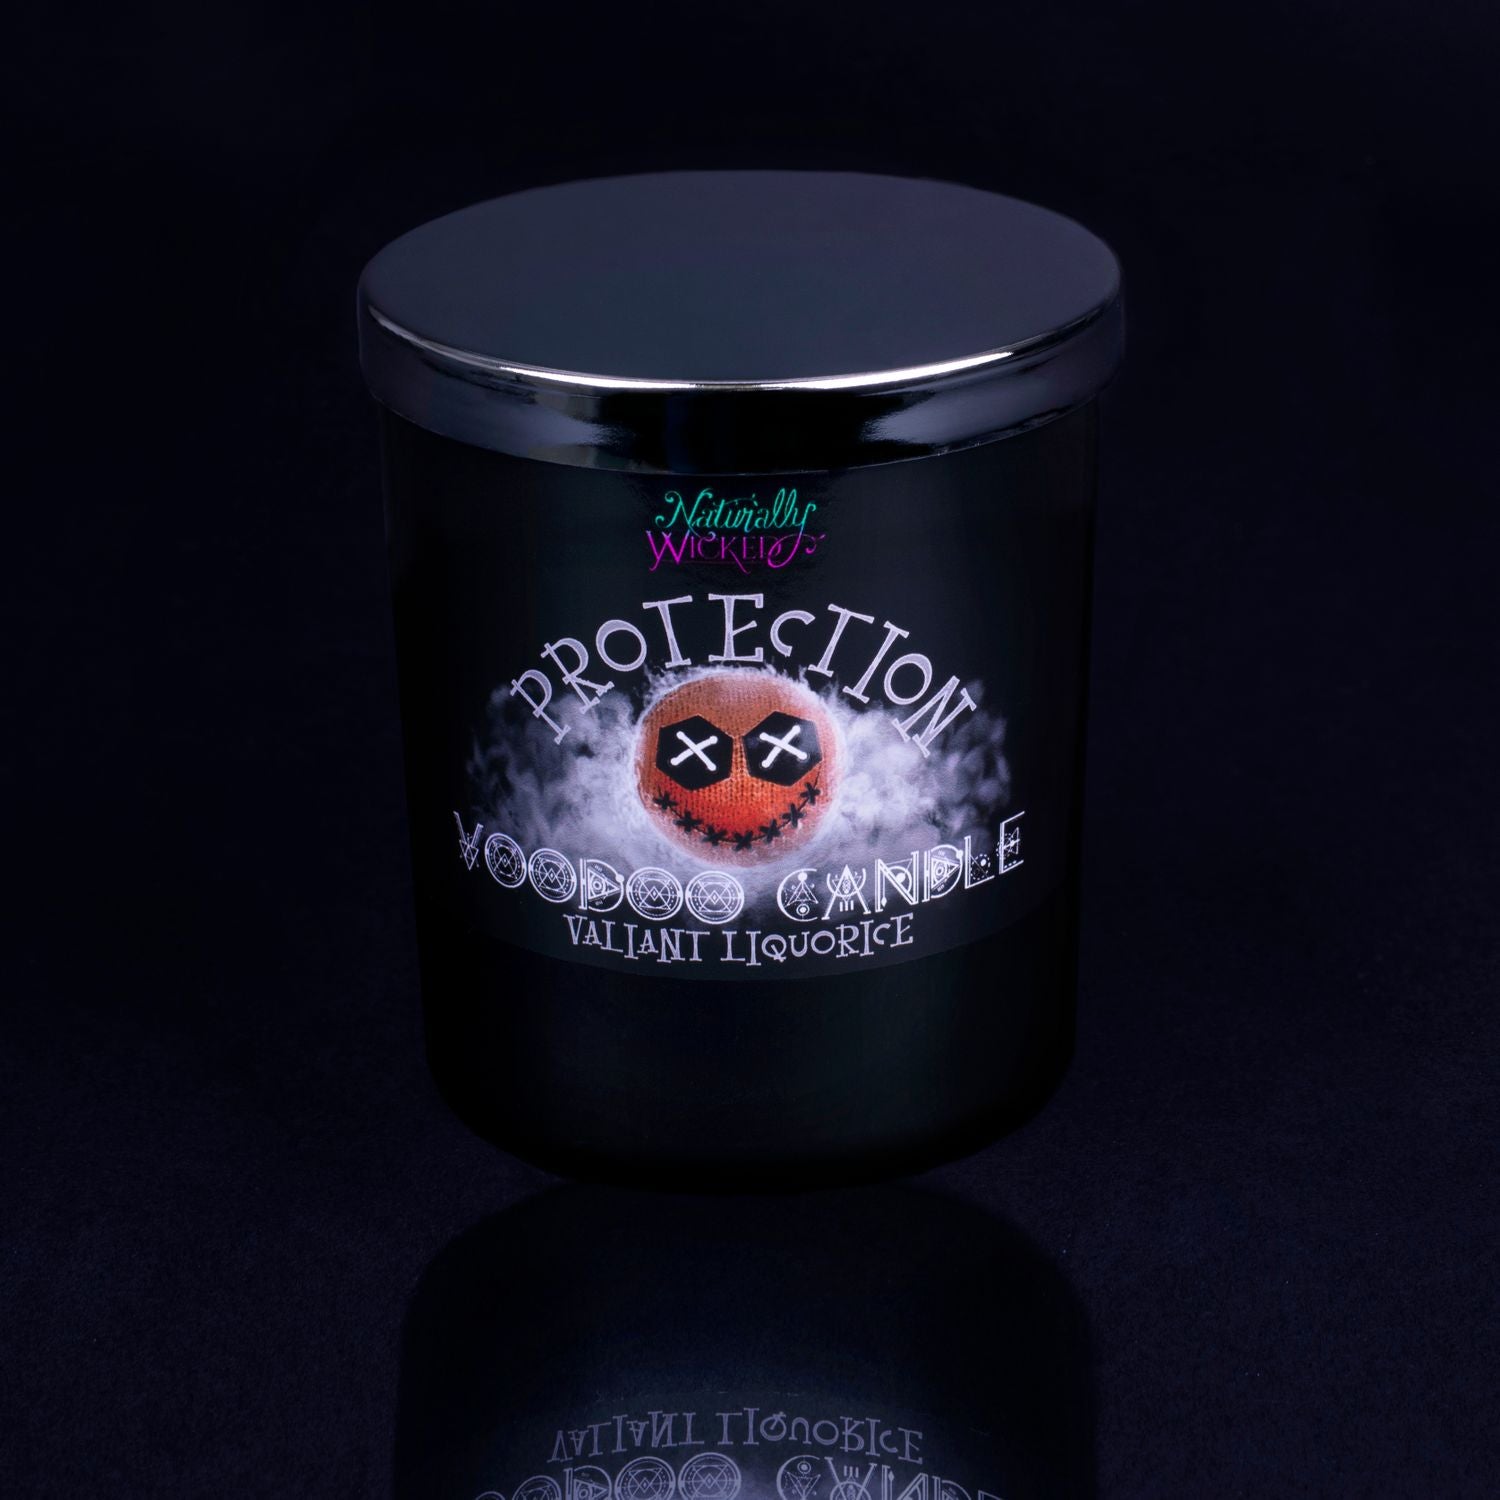 Naturally Wicked Voodoo Protection Spell Candle With Mirror Finished Exquisite Lid In Place. Featuring A Black Gloss Label, A Voodoo Doll Design And Valiant Liquorice Scent.